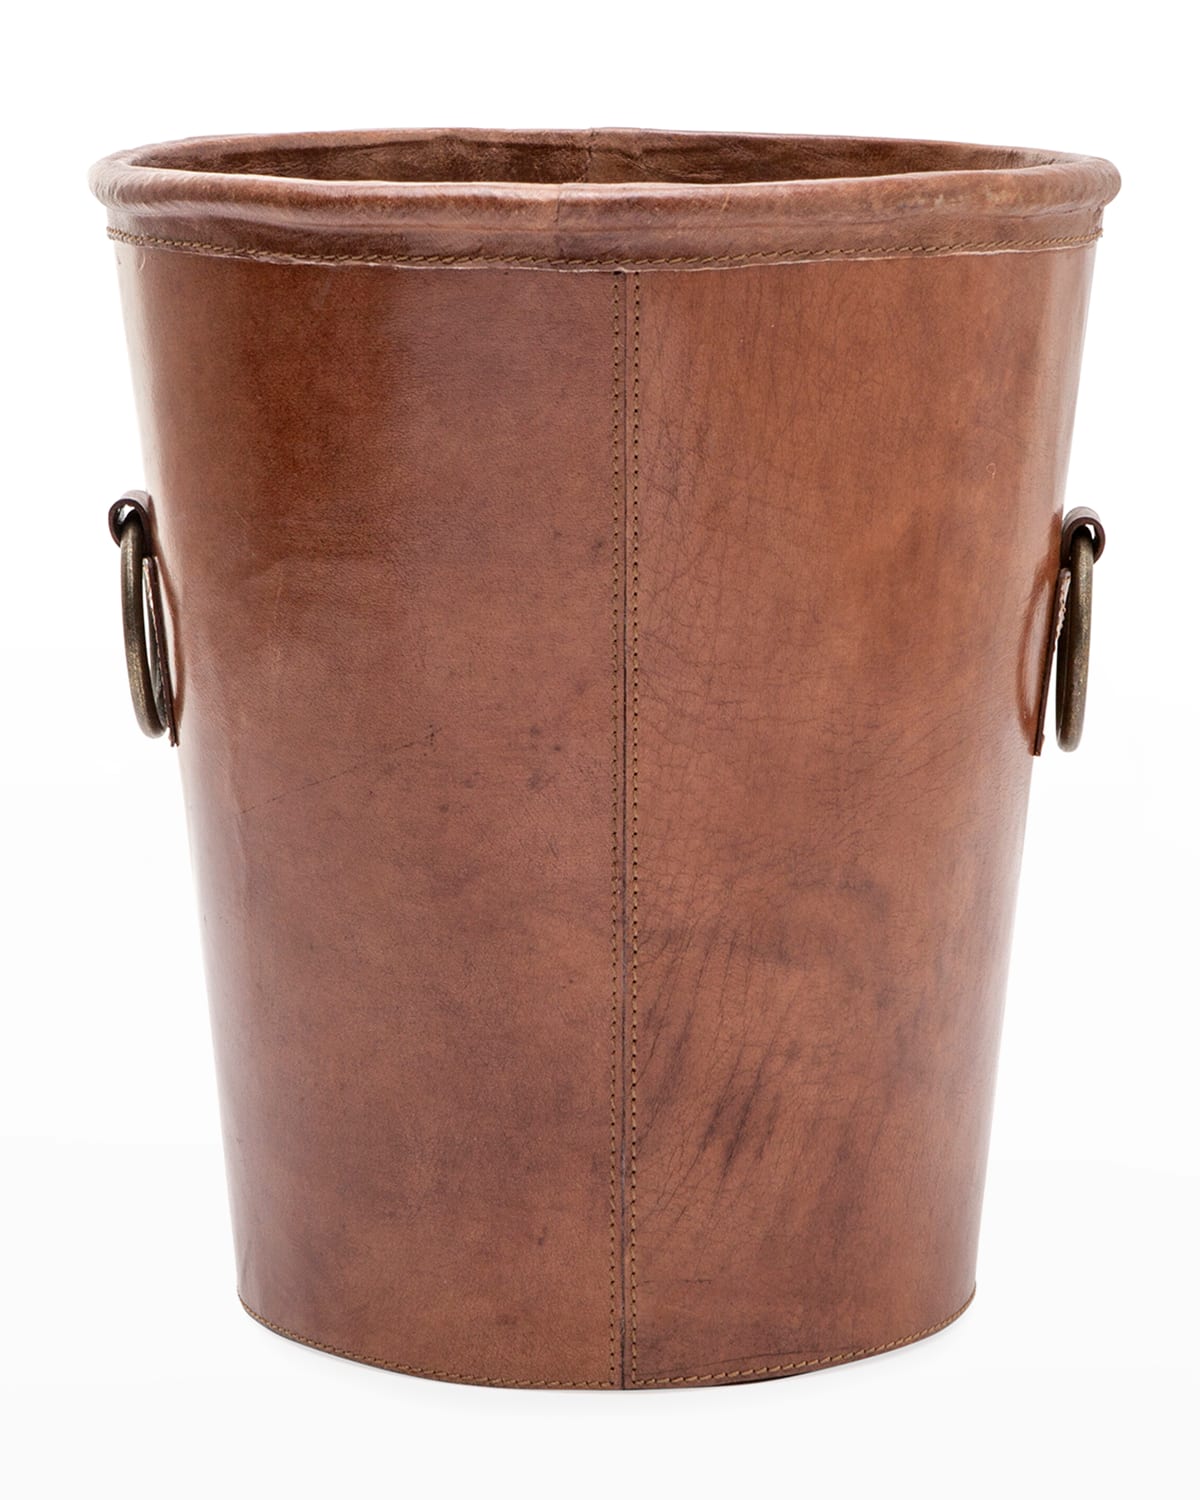 Pigeon & Poodle Ogden Small Round Leather Wastebasket In Tobacco